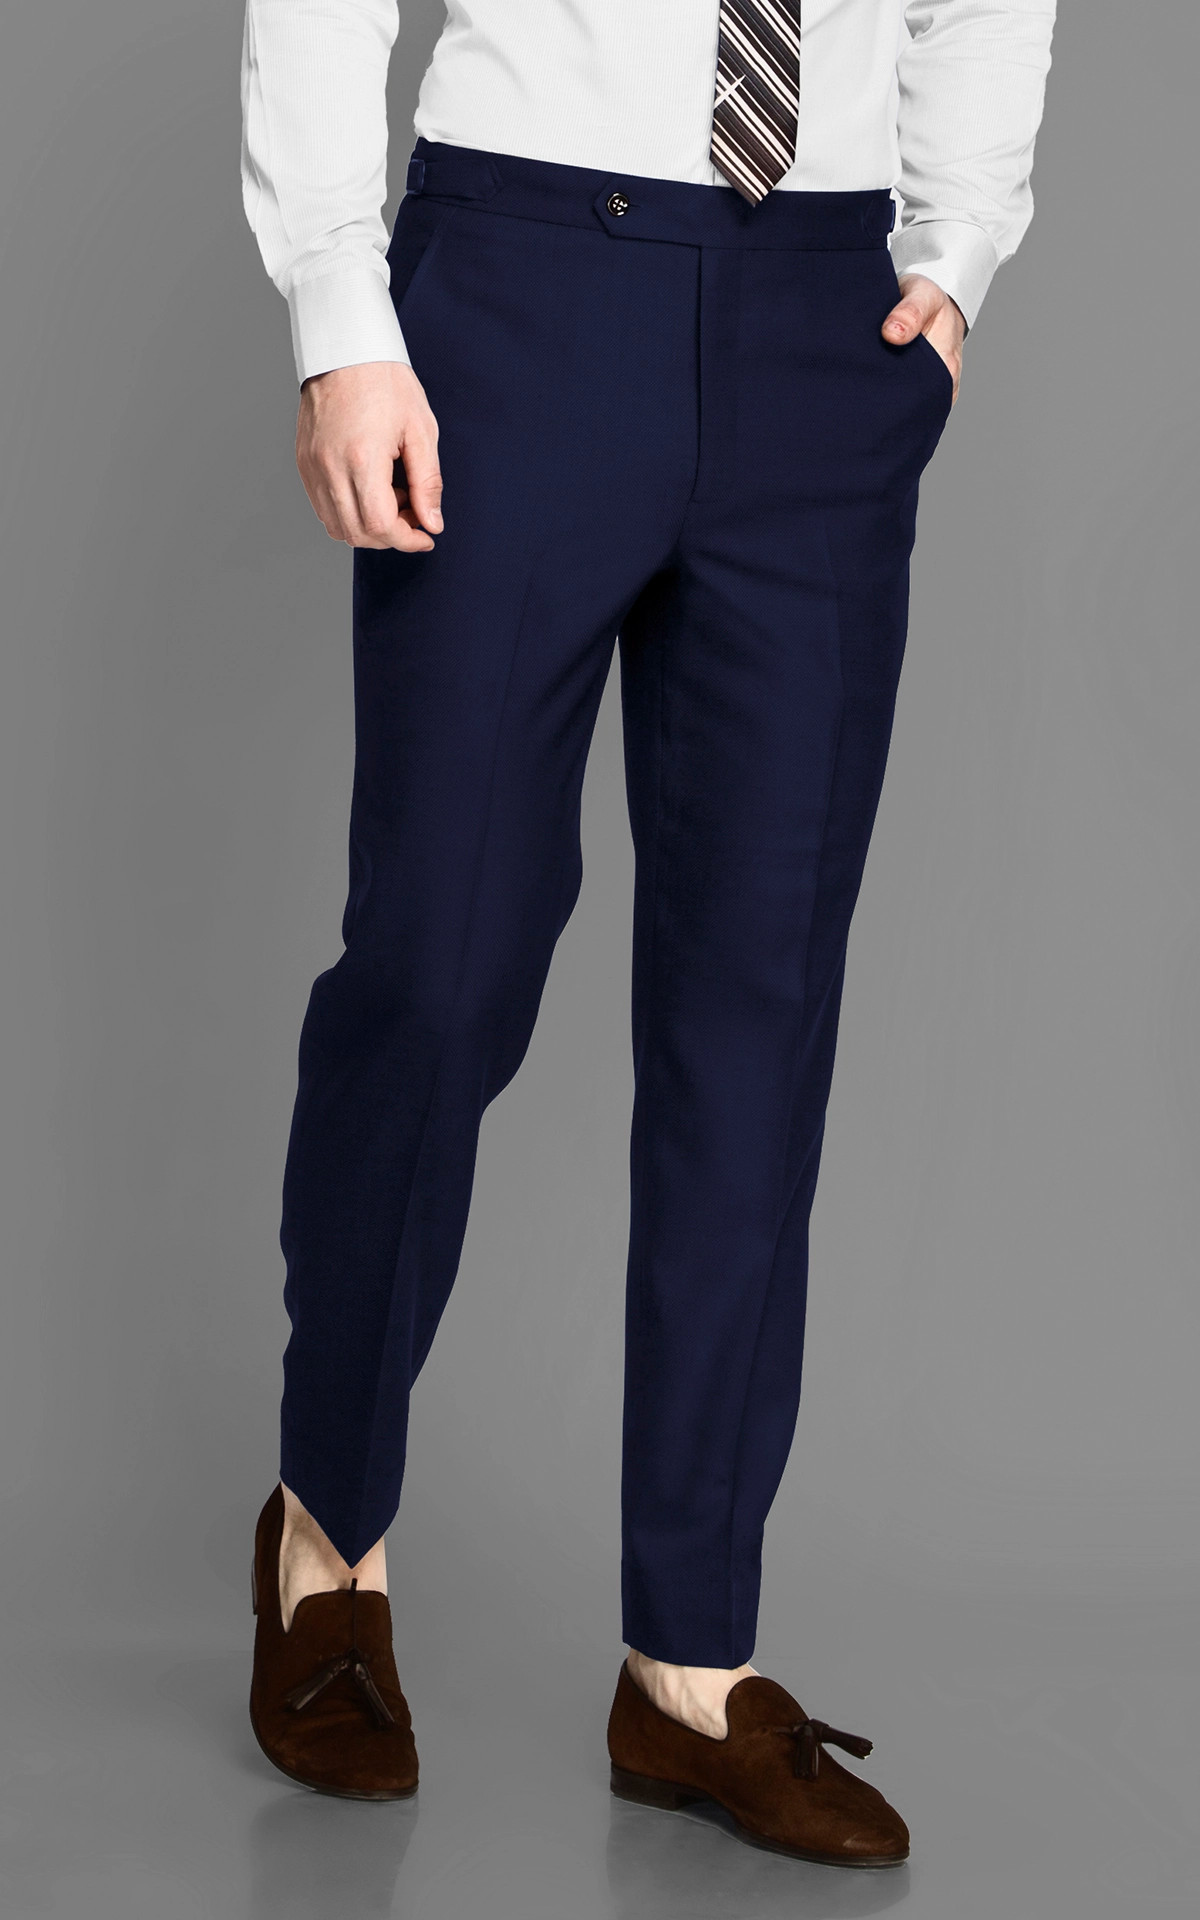 Casual Formal Office Trousers For Ladies Pants With Matching Belt - Navy  Blue - Wholesale Womens Clothing Vendors For Boutiques